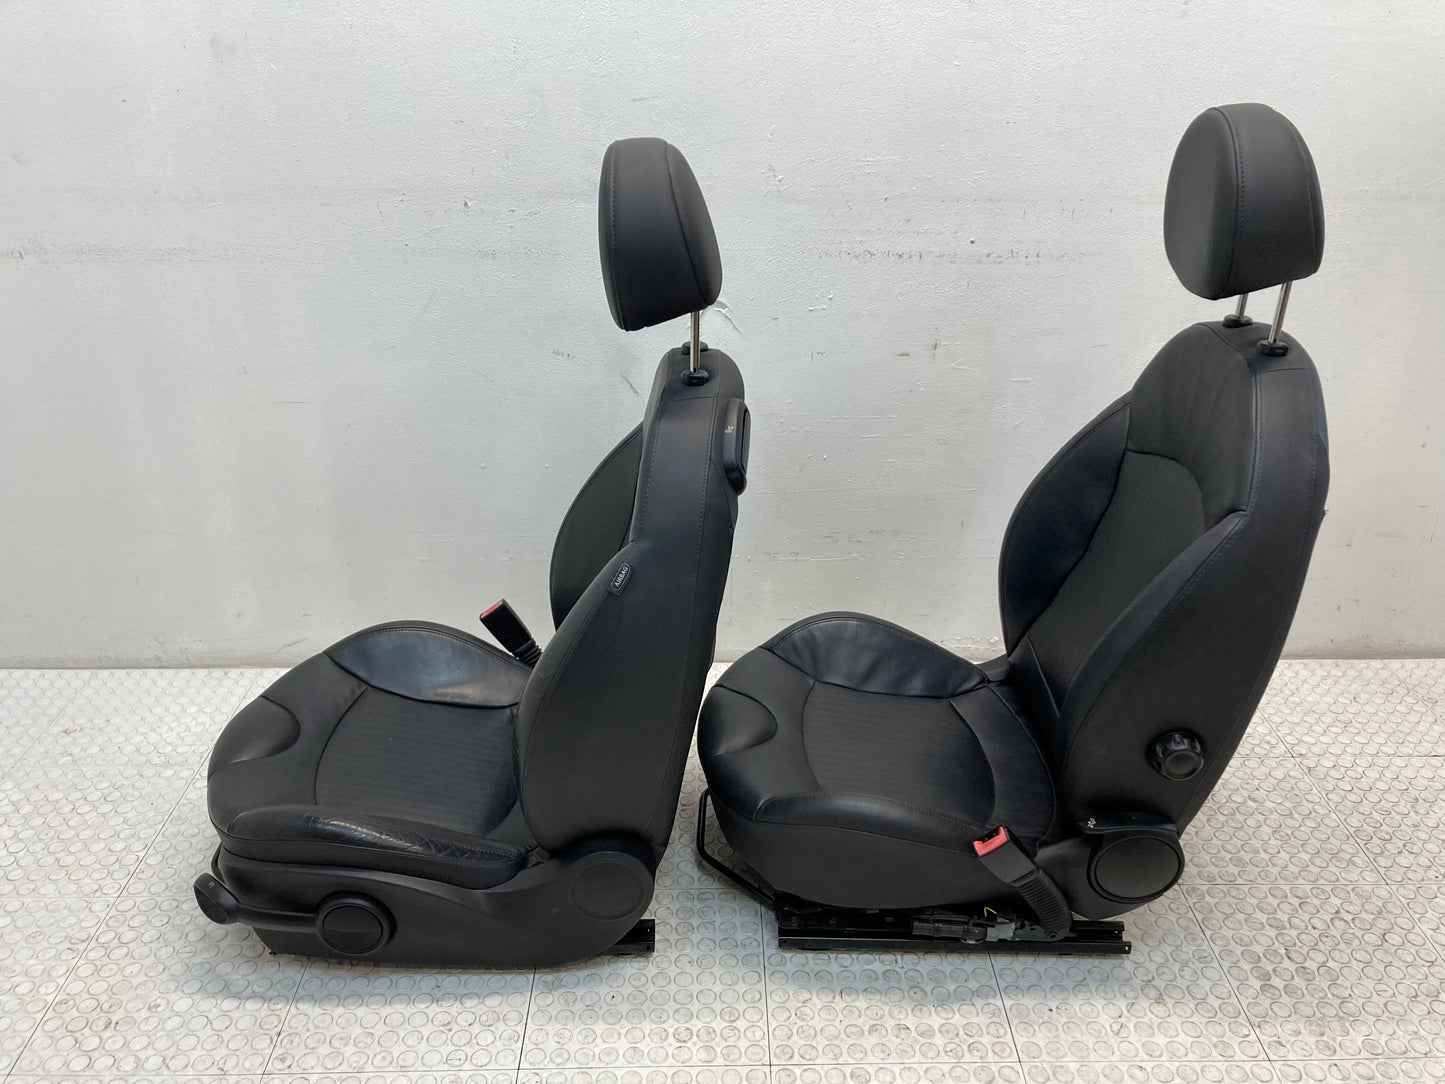 Mini Cooper Sport Seats Leather Punch Carbon Black T8E1 Heated 07-14 R56 R55 407